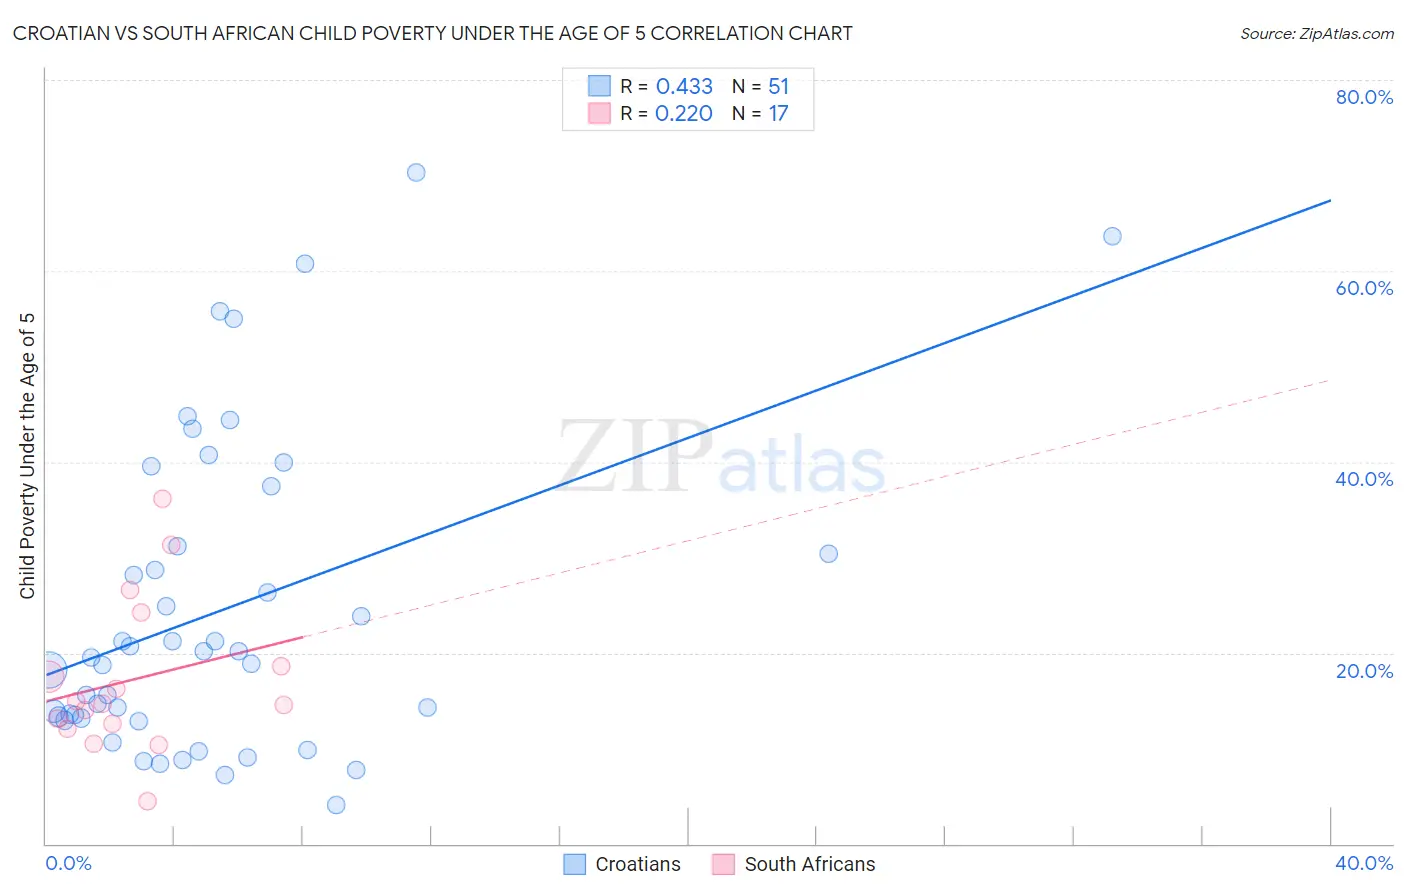 Croatian vs South African Child Poverty Under the Age of 5